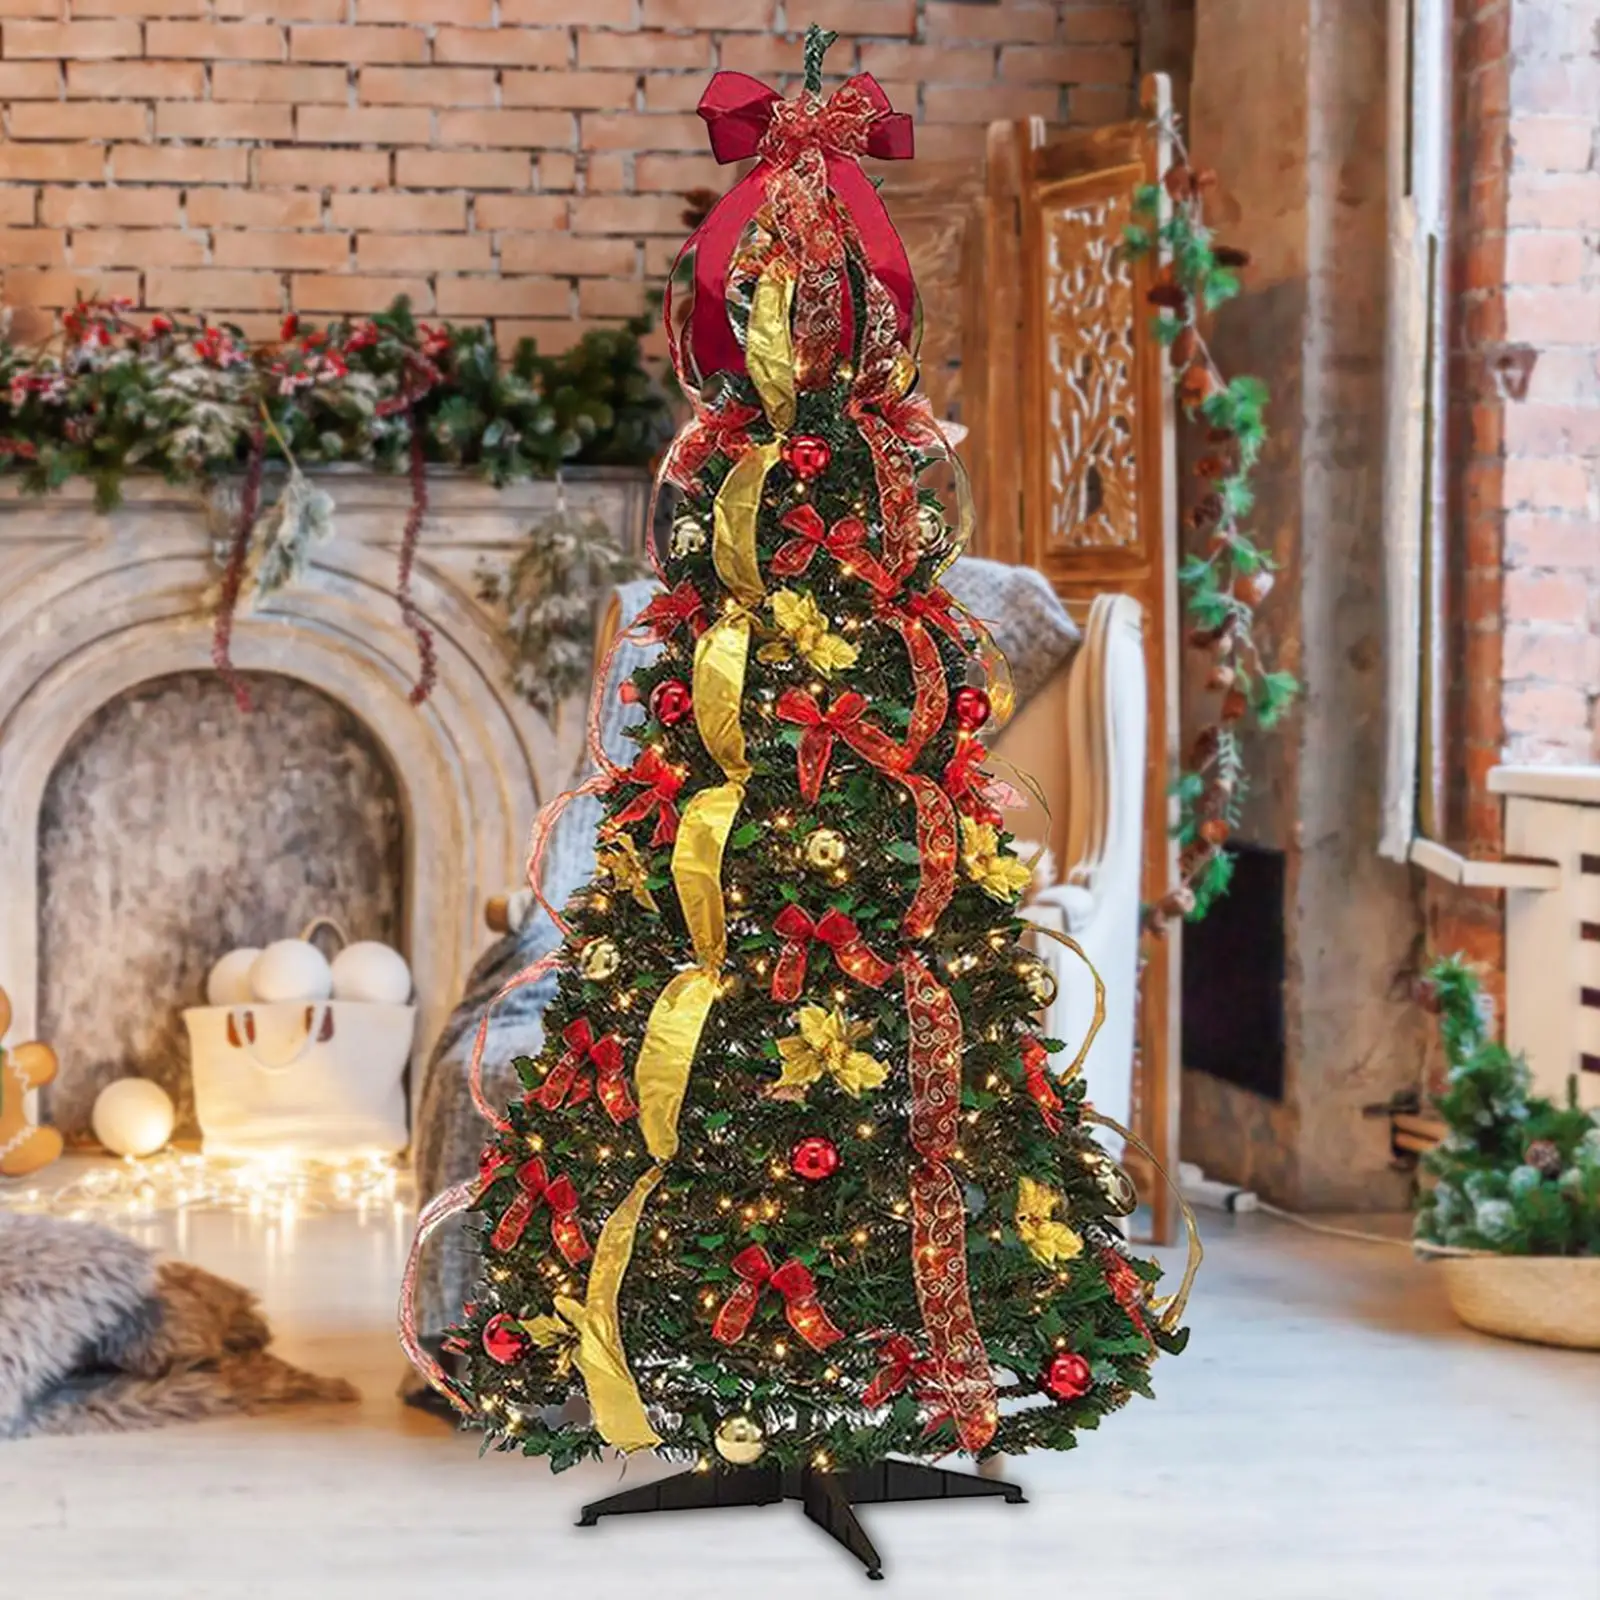 Foldable Christmas Tree 6 ft Easy Assembly Holiday Party Decor Ornaments Lighted Xmas Tree Pre Lit Christmas Tree Decoration